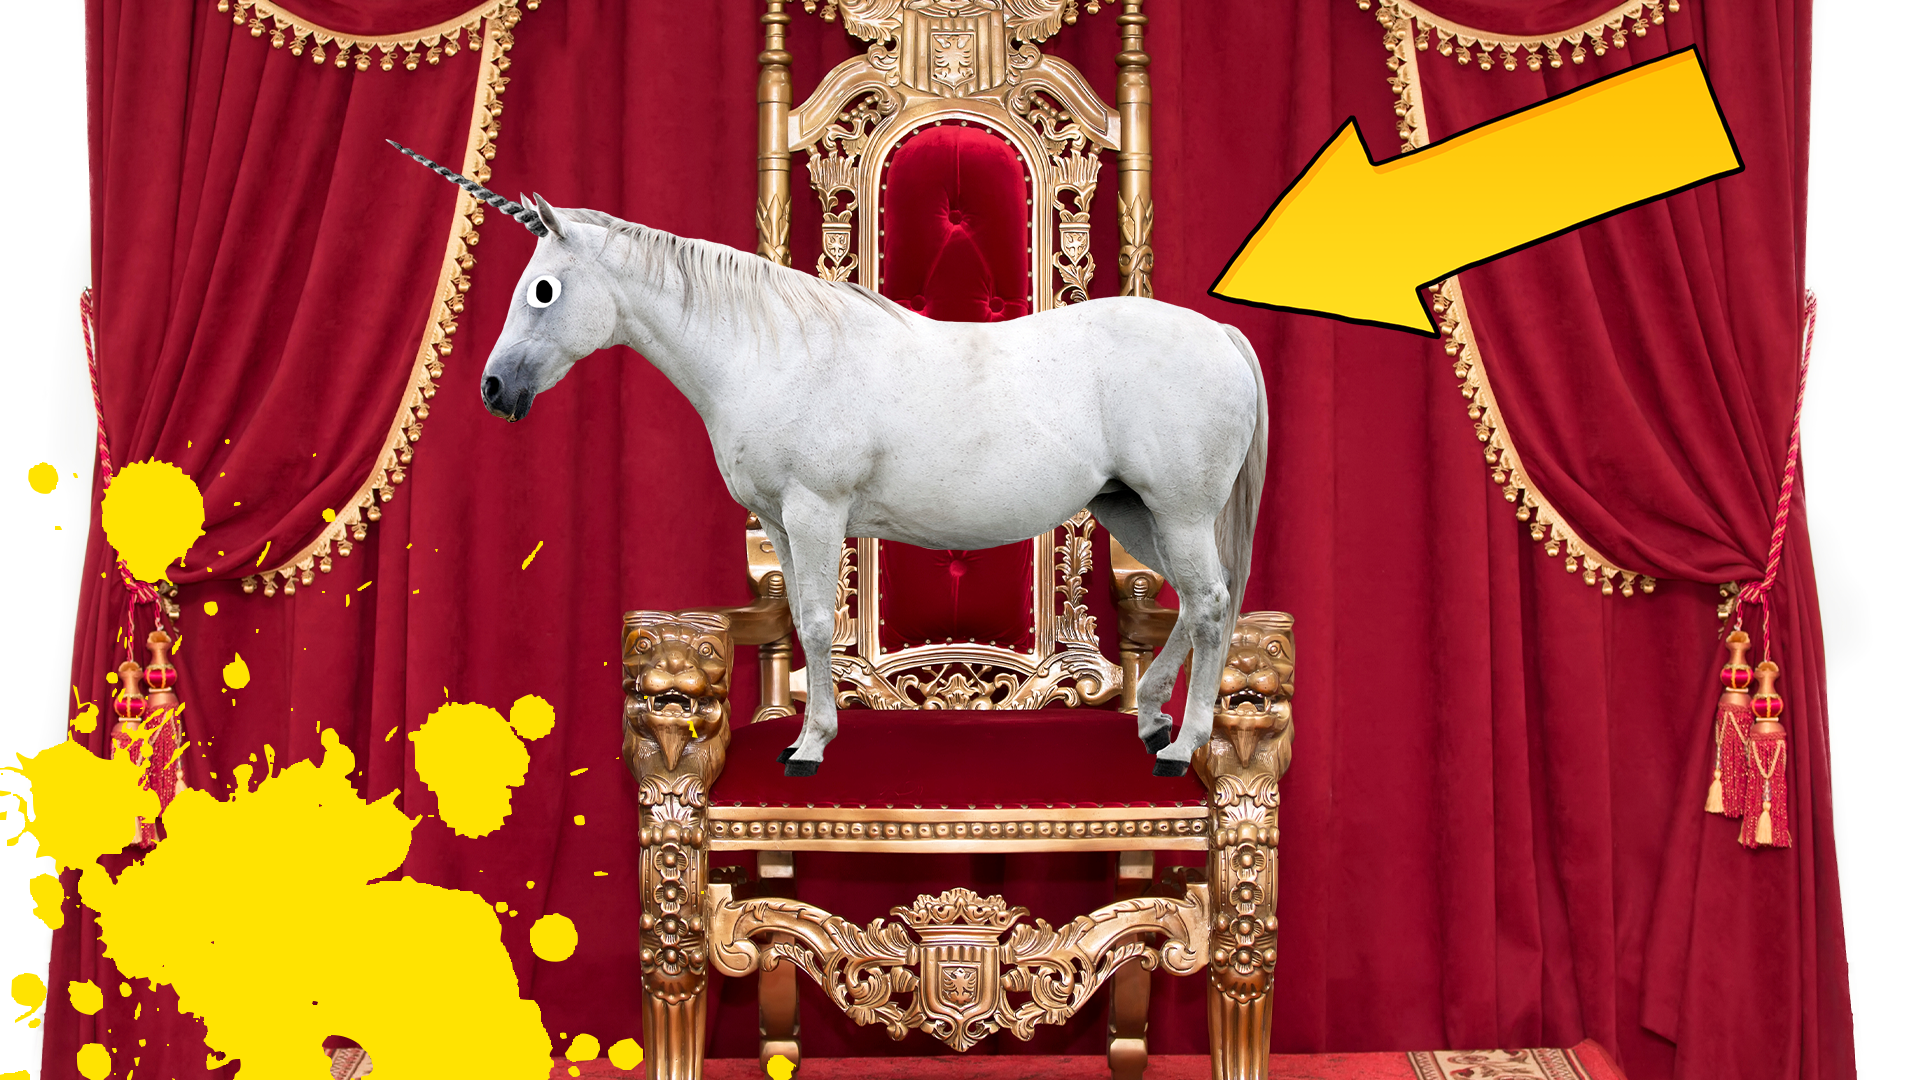 Unicorn on throne with arrow and yellow splats 